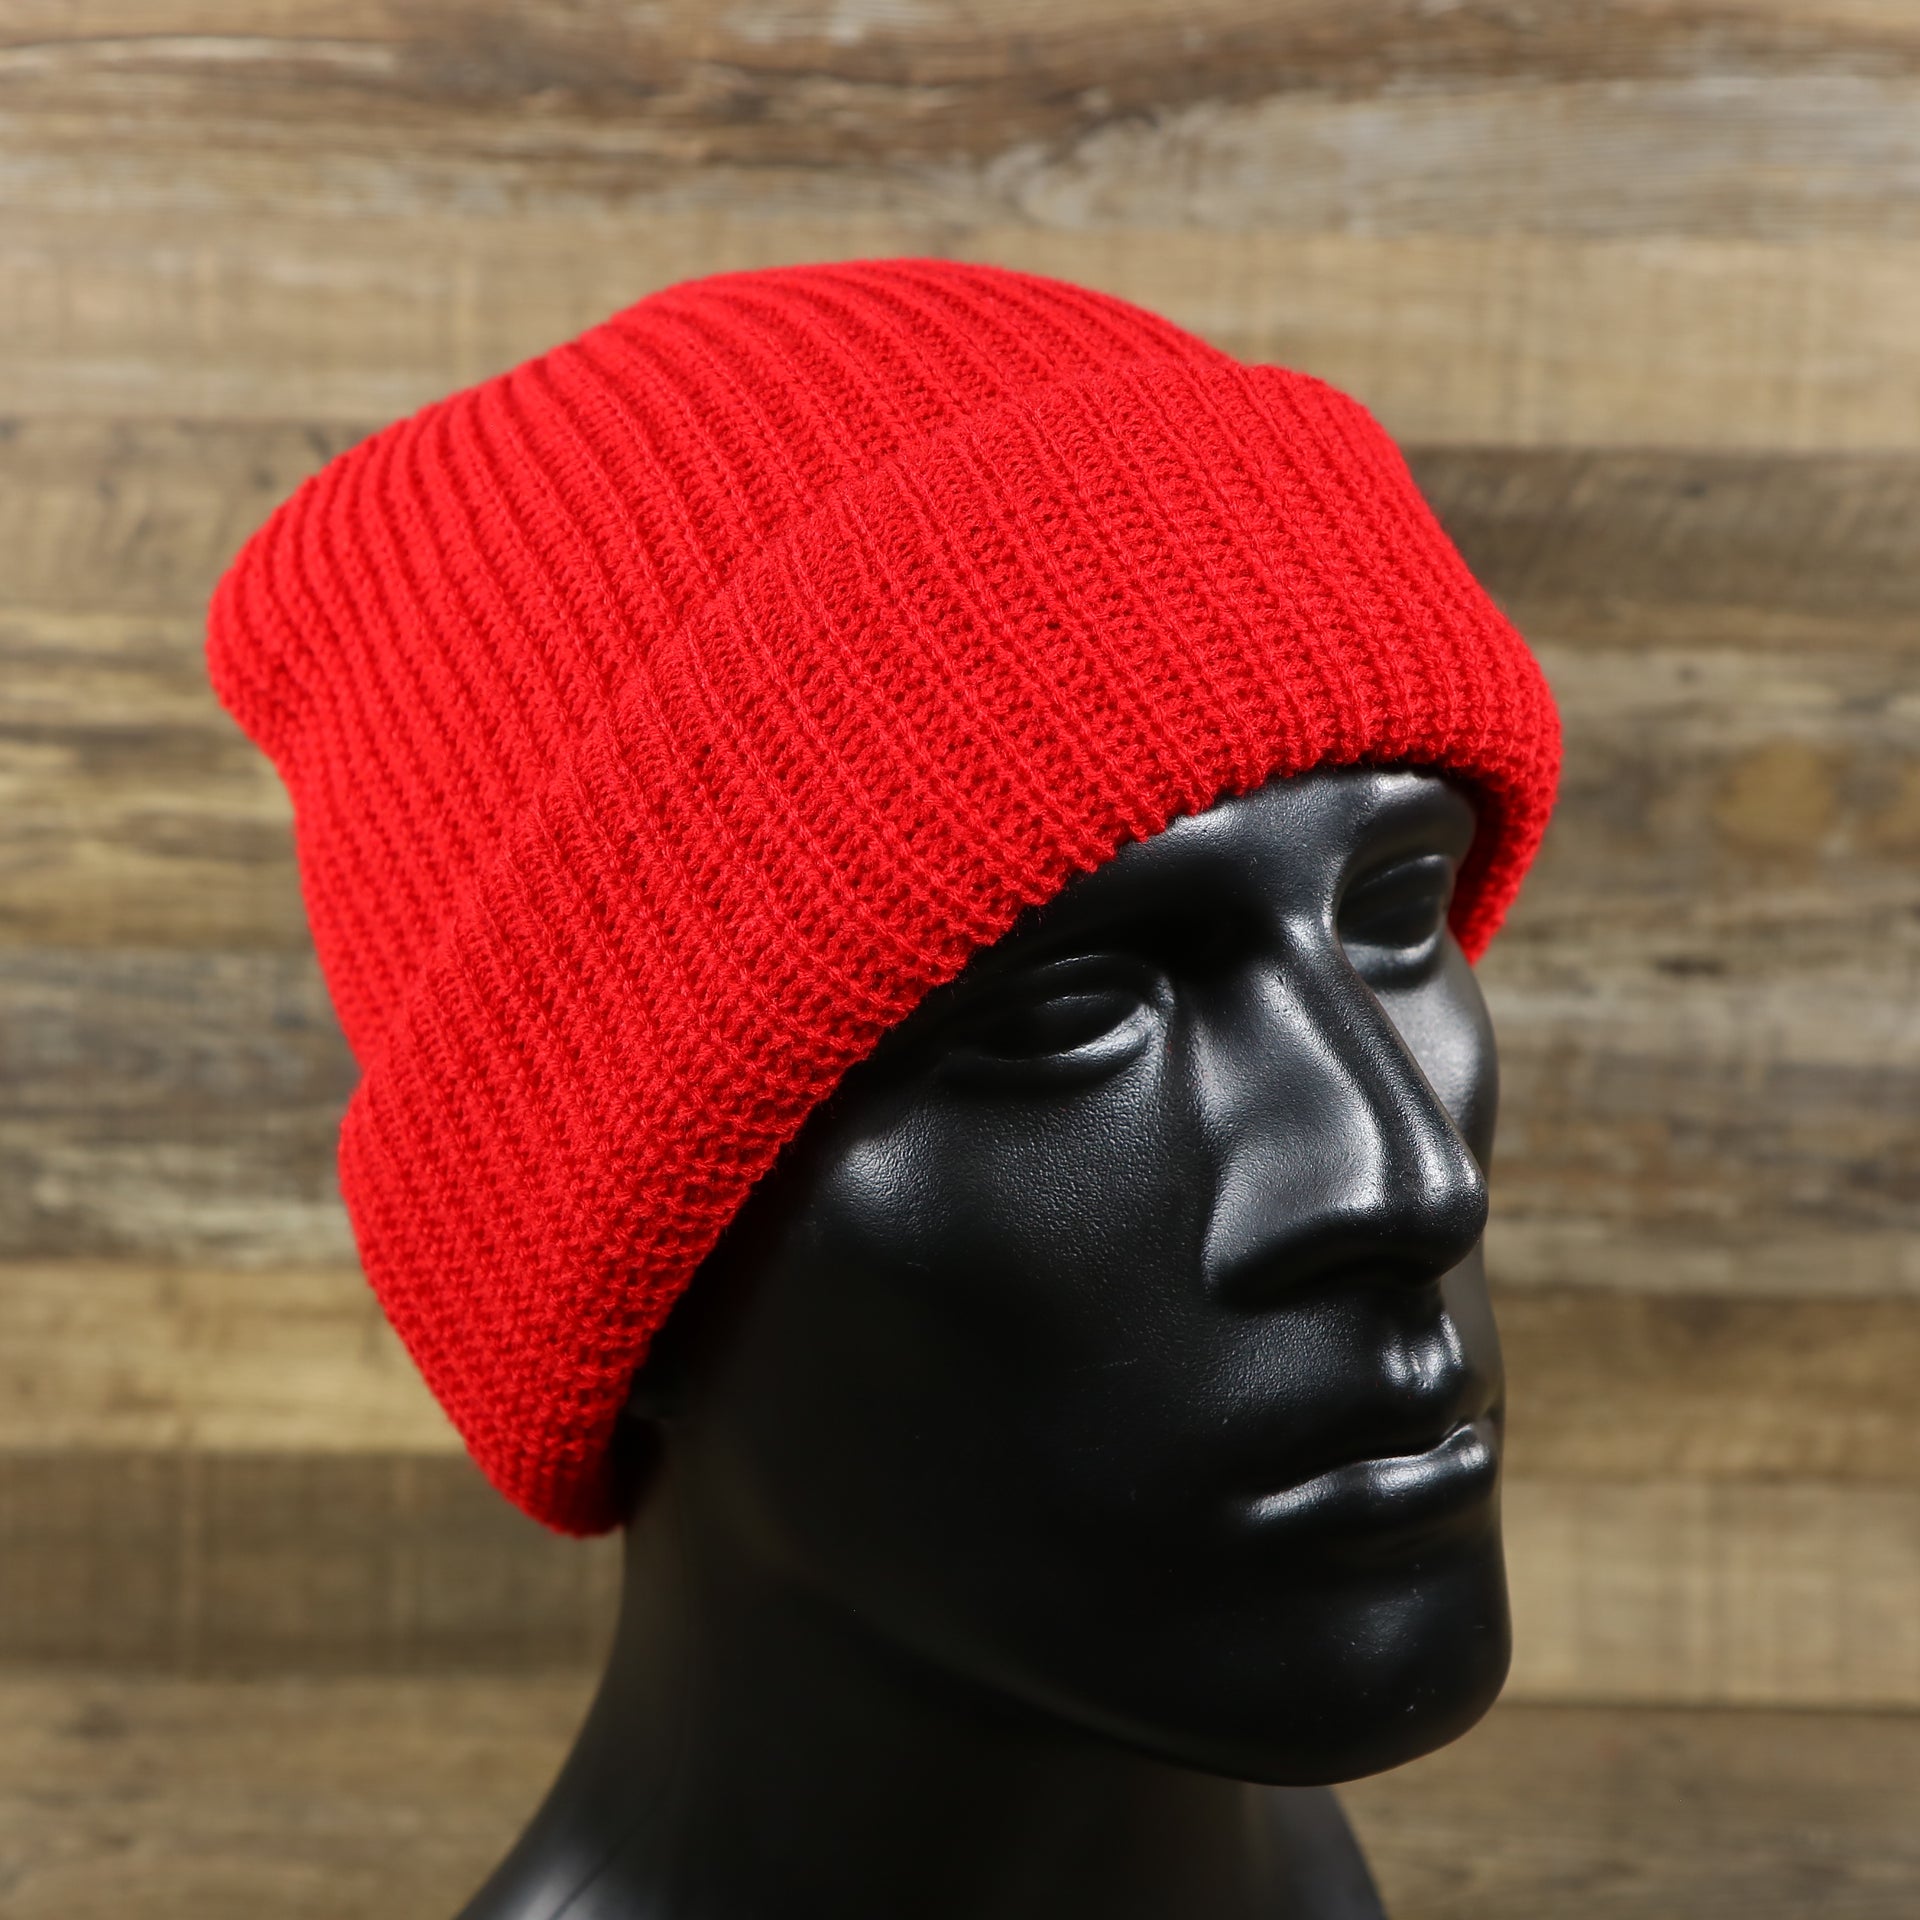 The Cardinal Red Blank Three Hole Winter Knit Ski Mask | Red Ski Mask rolled up as a beanie with a mannequin 